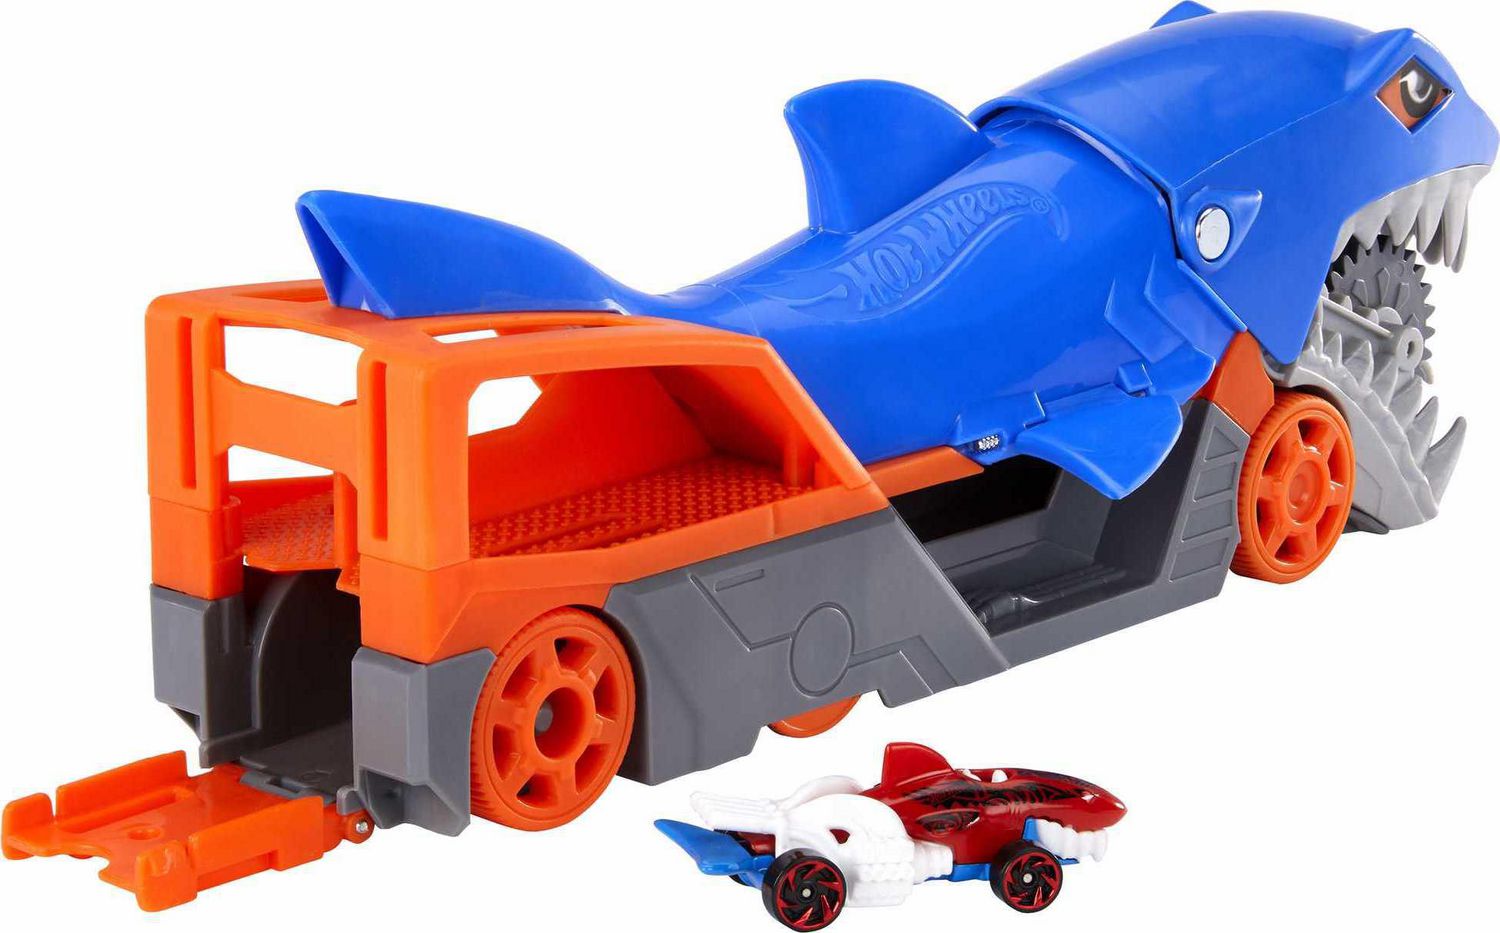 Hot Wheels Shark Chomp Transporter Playset with One 1:64 Scale Car